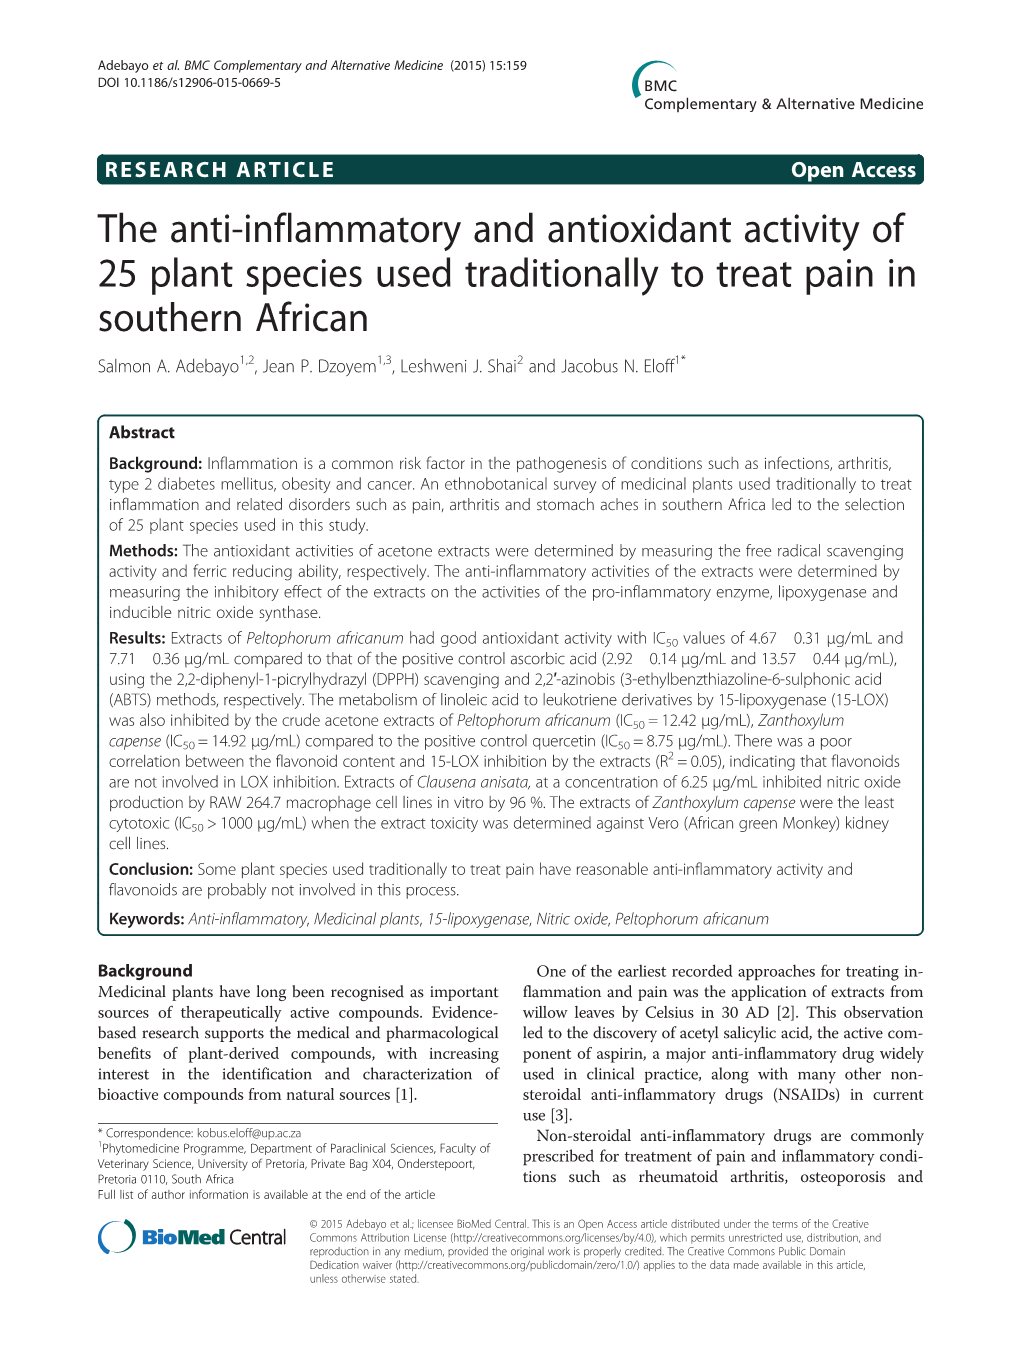 The Anti-Inflammatory and Antioxidant Activity of 25 Plant Species Used Traditionally to Treat Pain in Southern African Salmon A